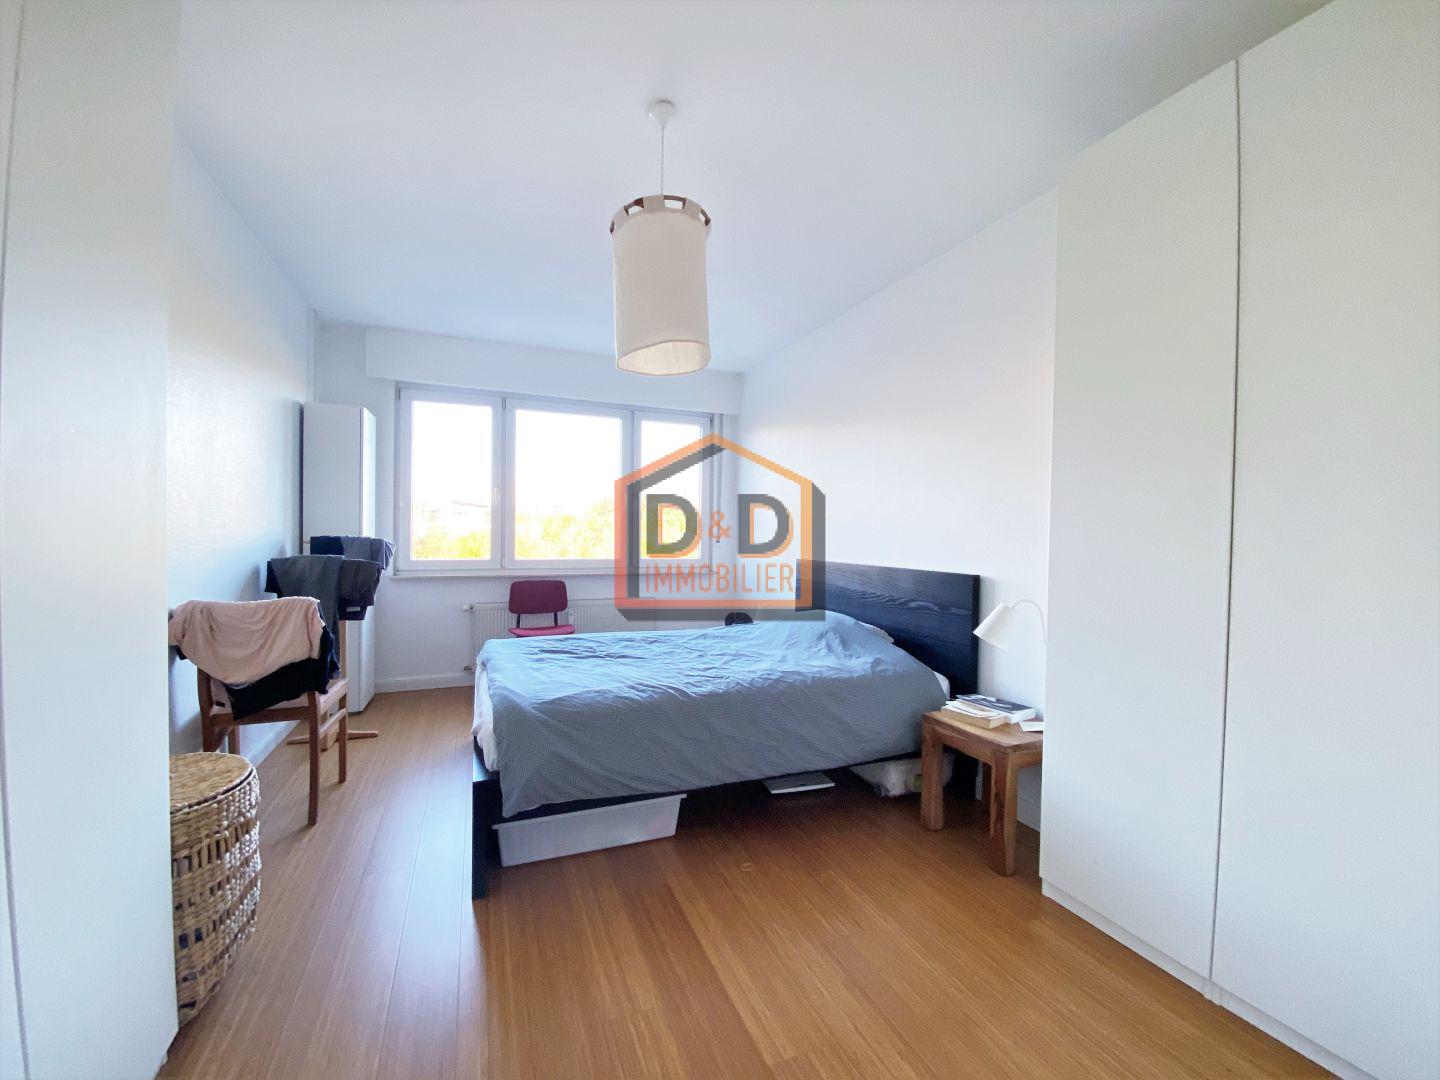 Appartement à Luxembourg, 59 m², 1 chambre, 1 400 €/mois